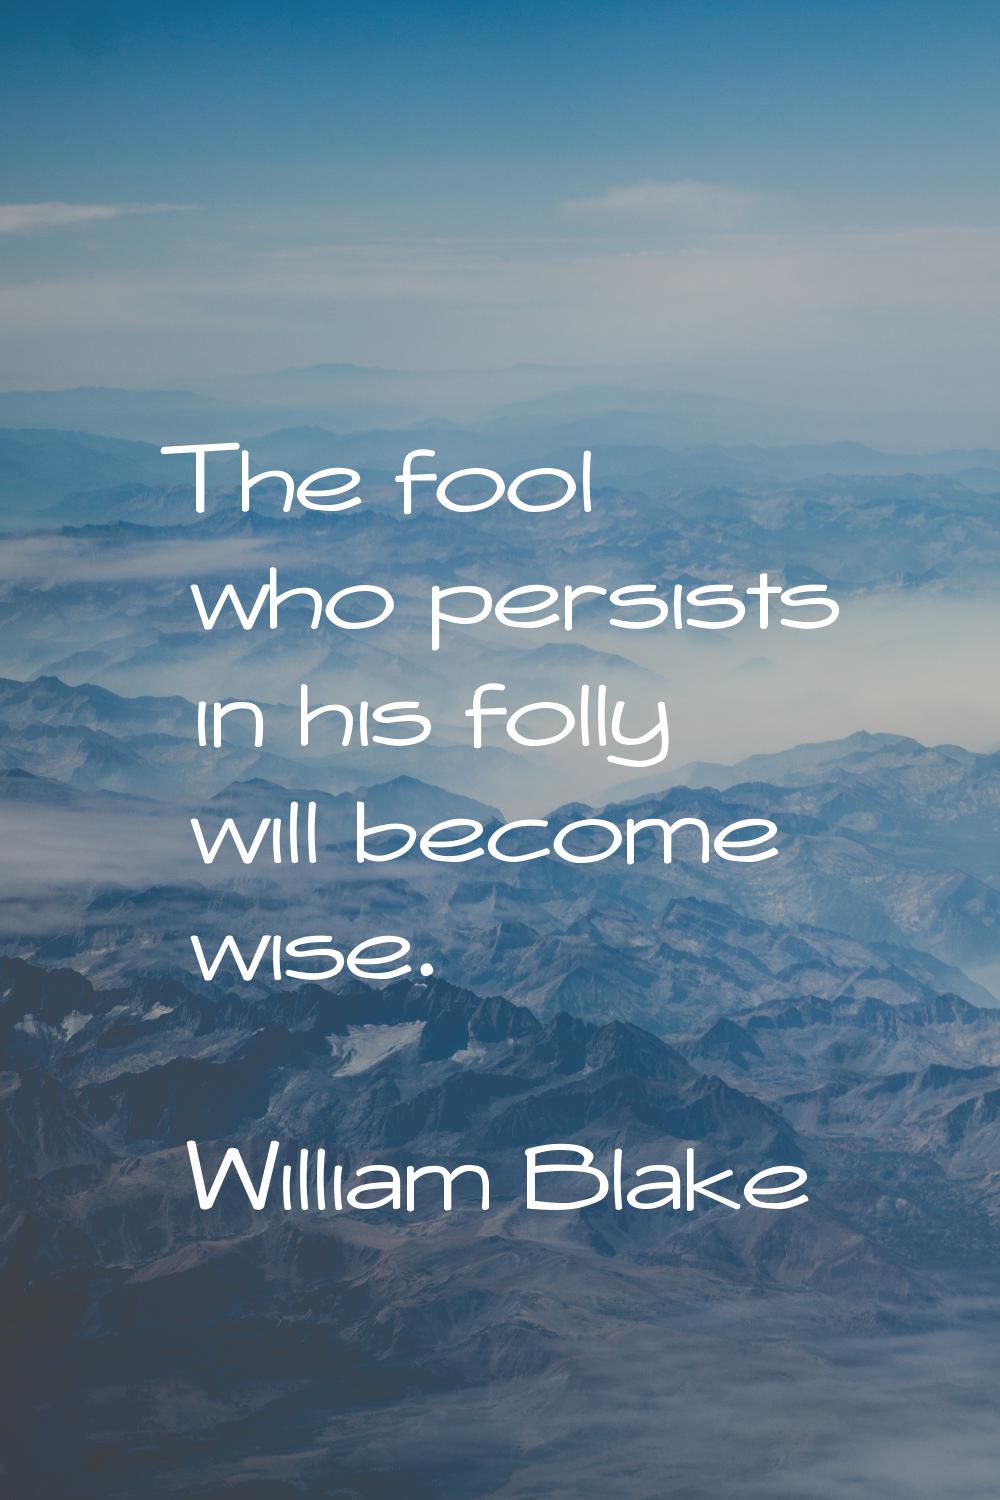 The fool who persists in his folly will become wise.